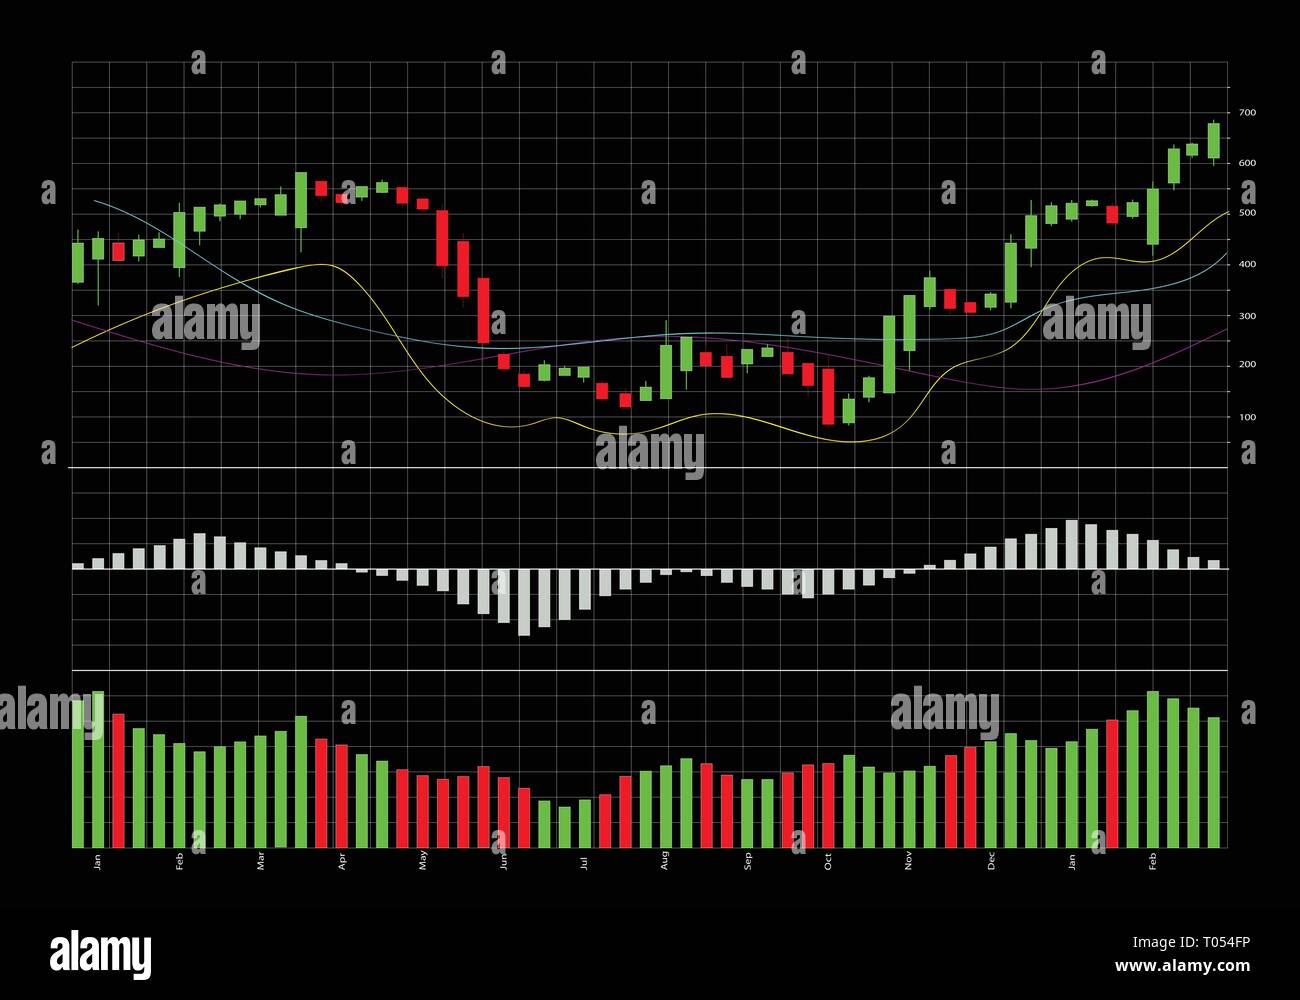 What Is Macd In Stock Charts